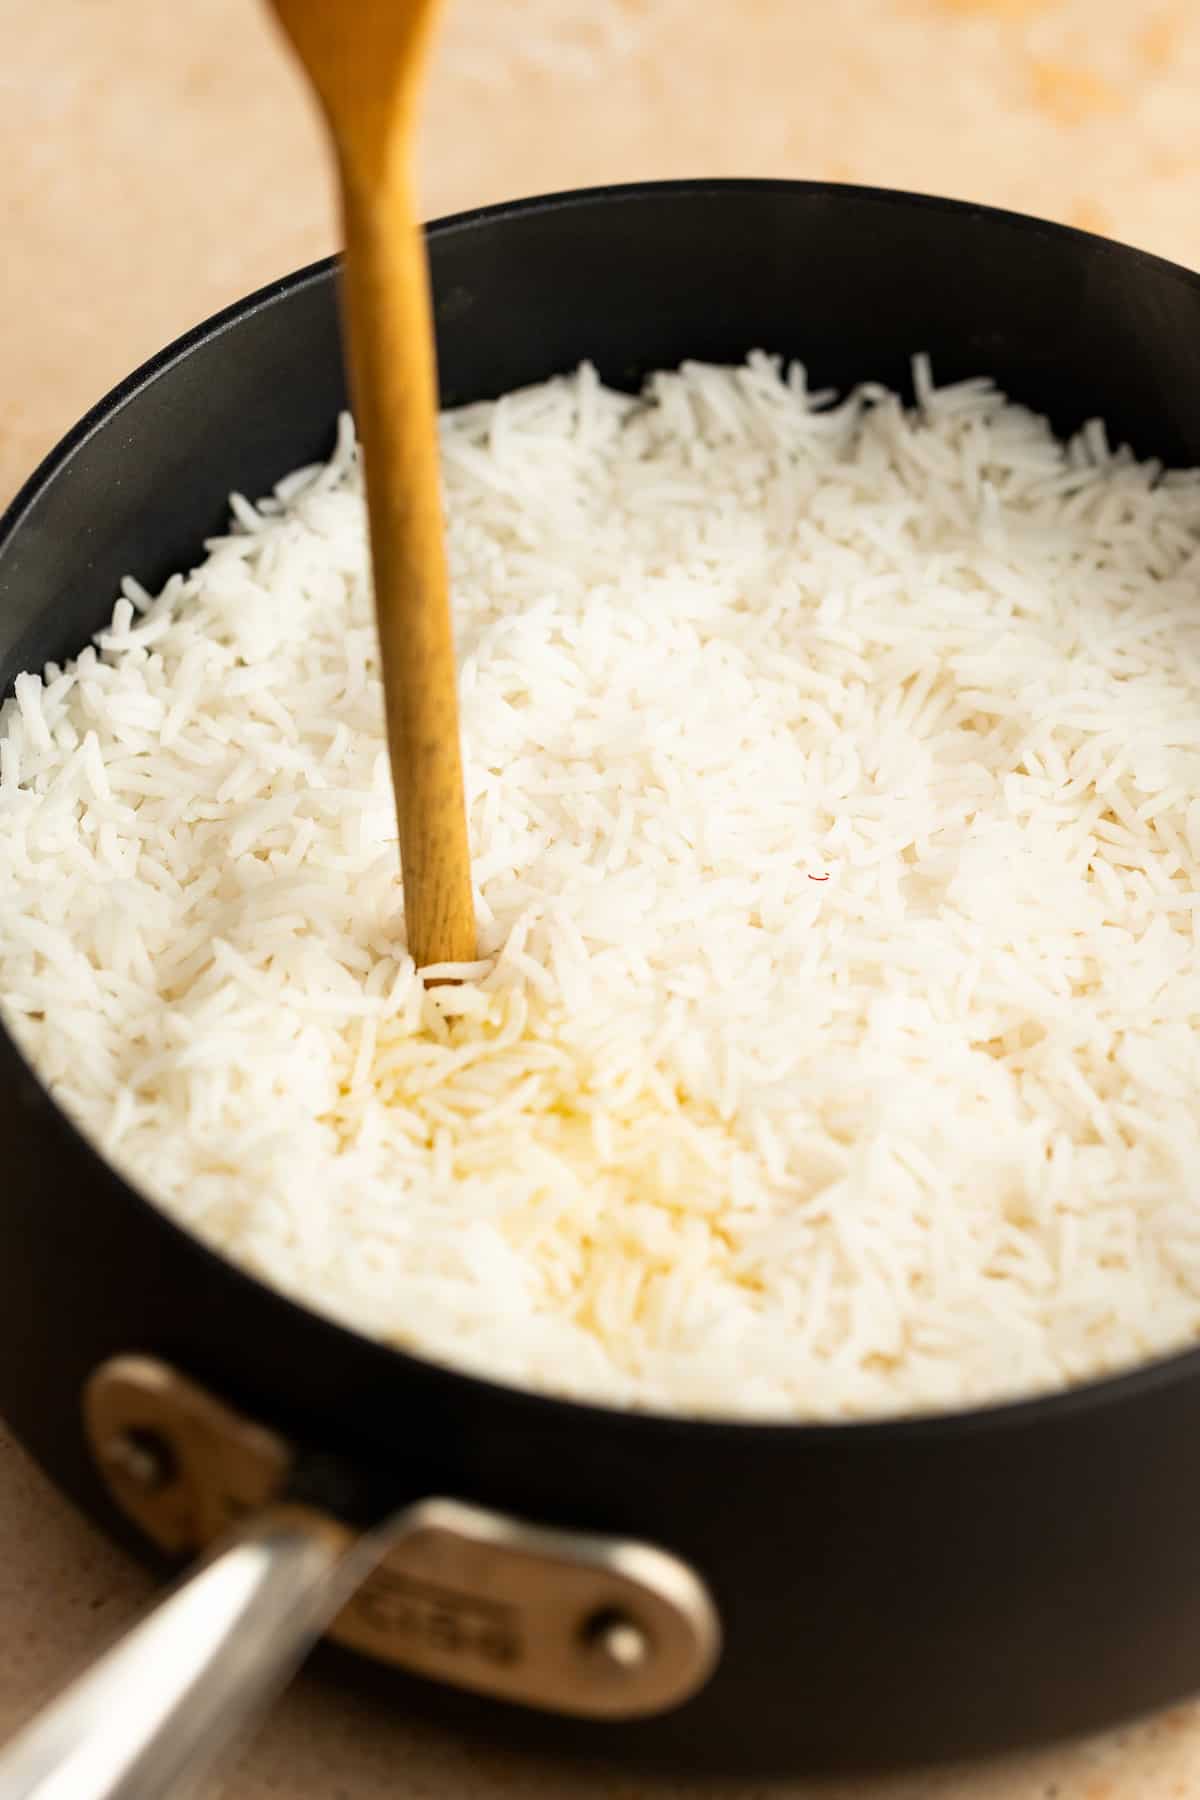 Poking holes in the rice.